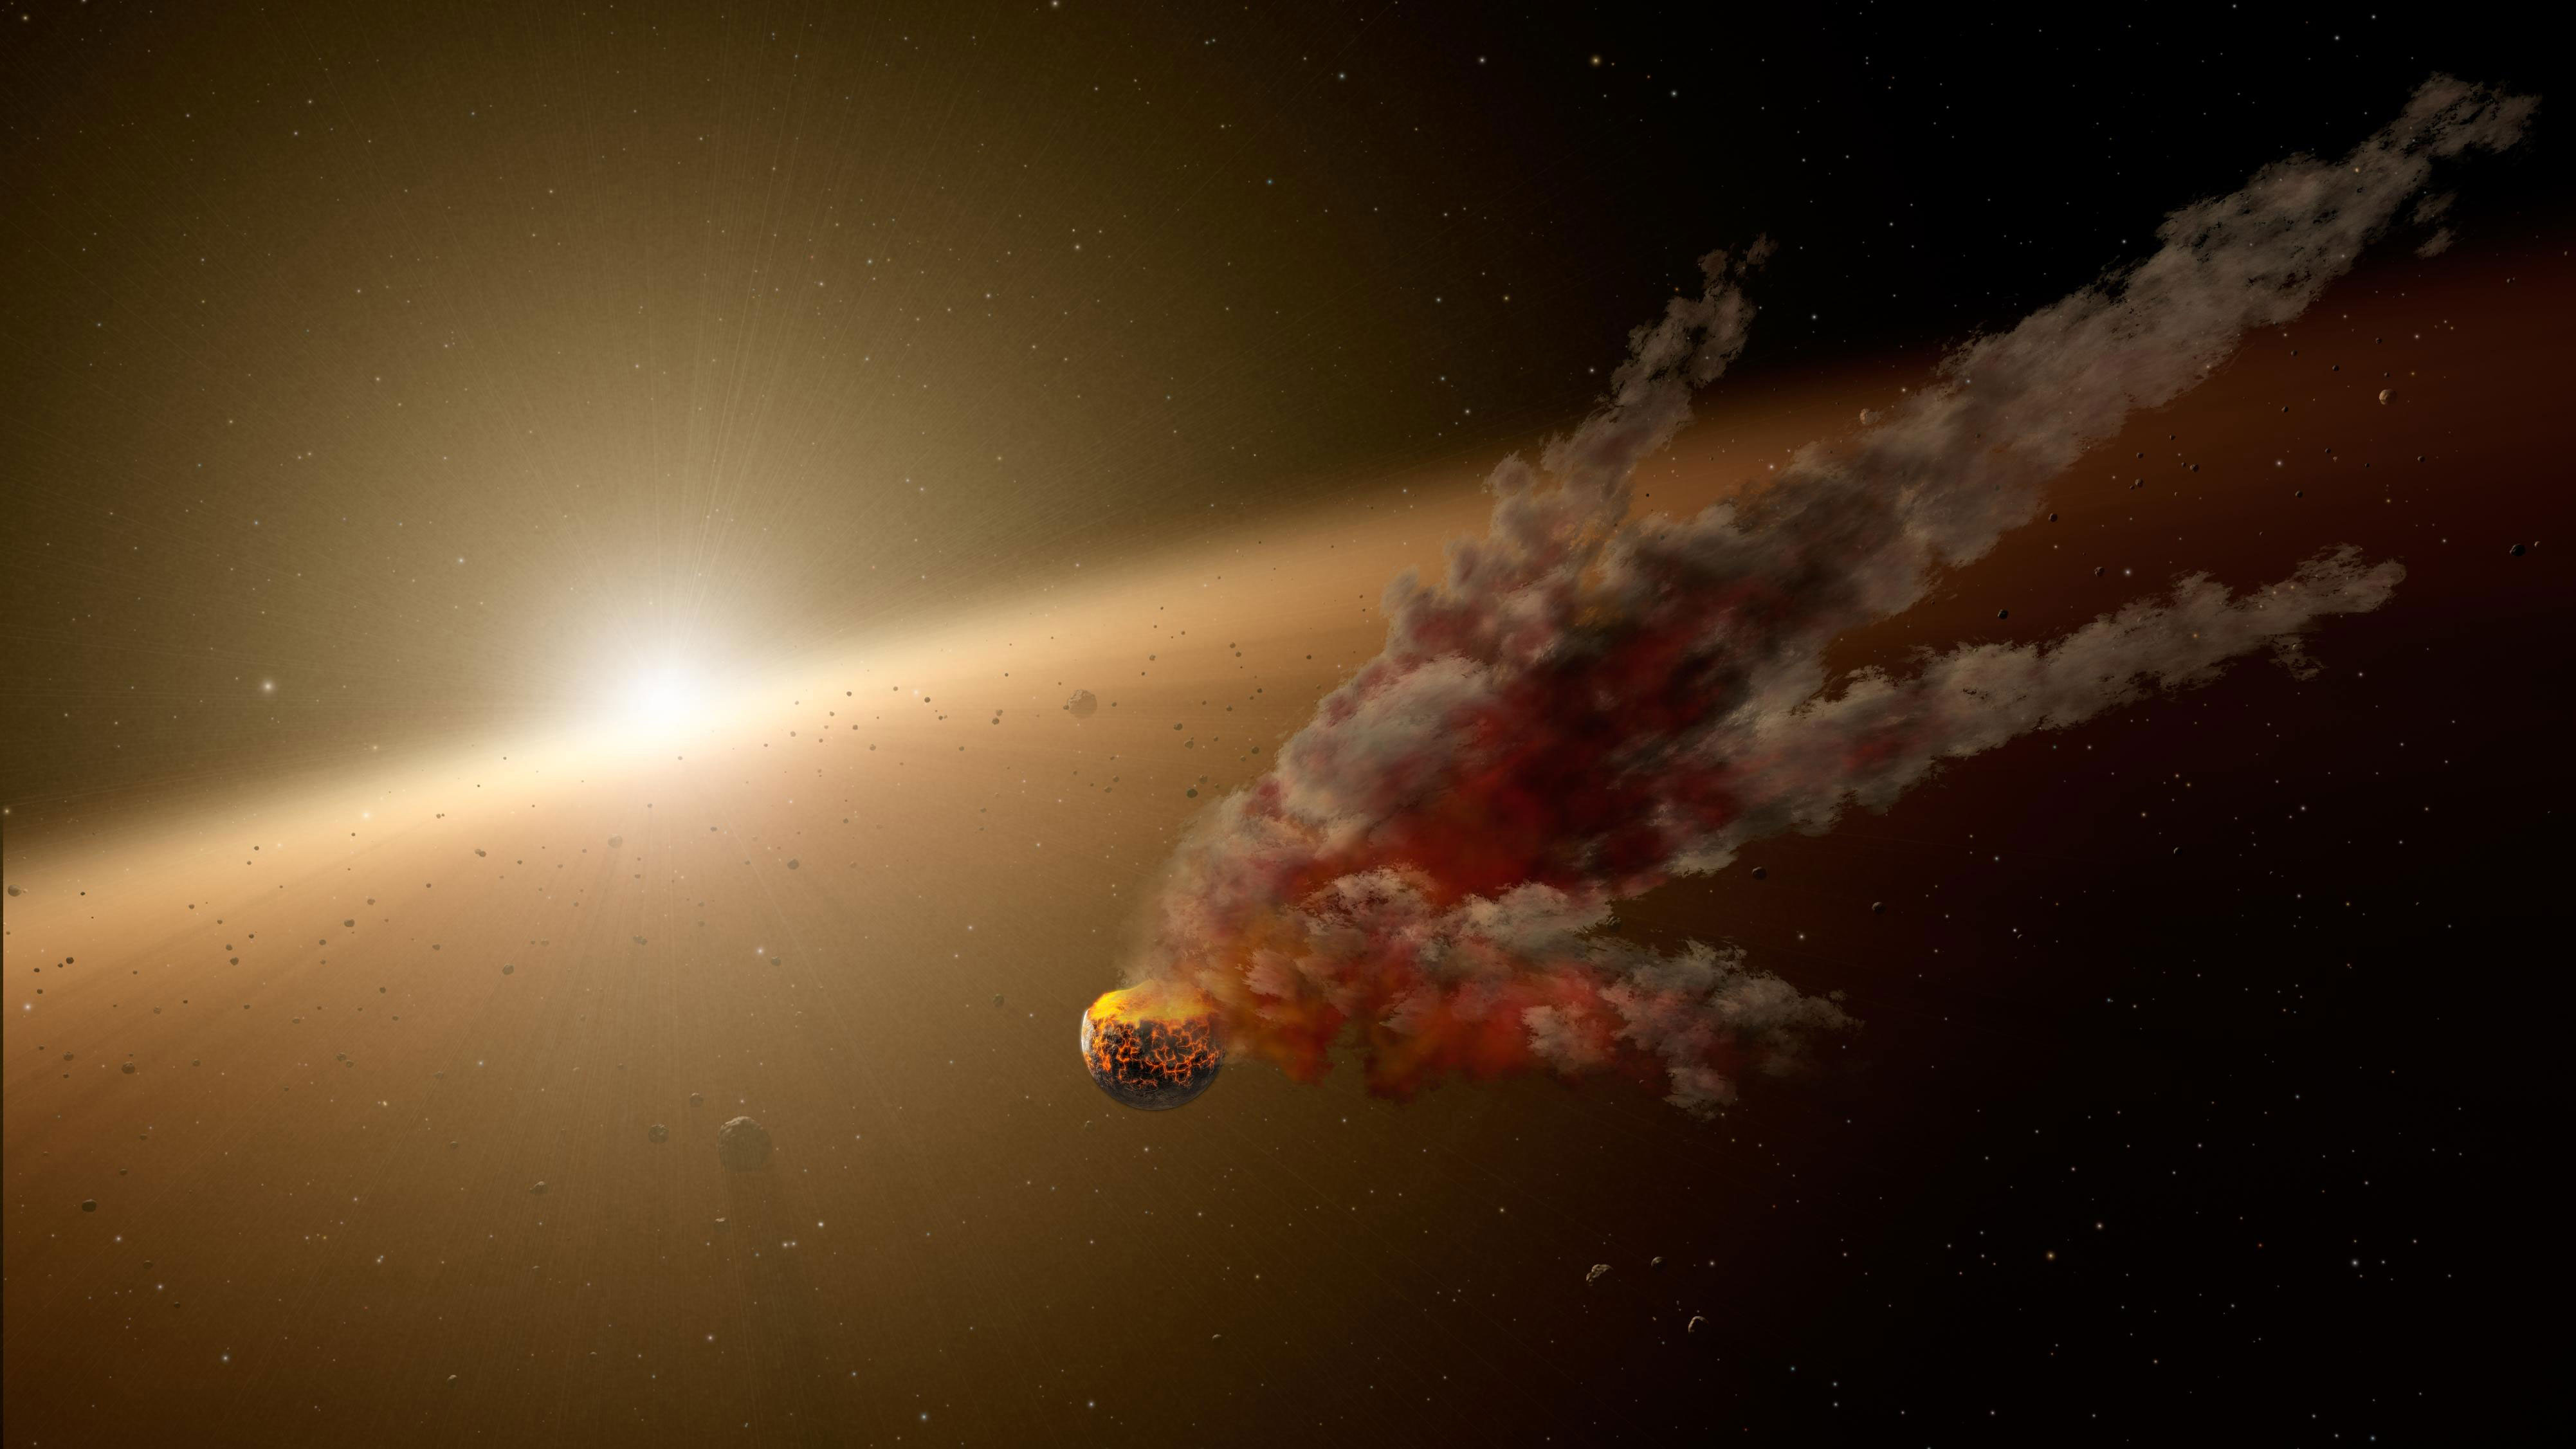 Artist’s concept of building planets through collisions – planetary accretion in the Solar Nebula 4.56 billion years ago. Credit: NASA